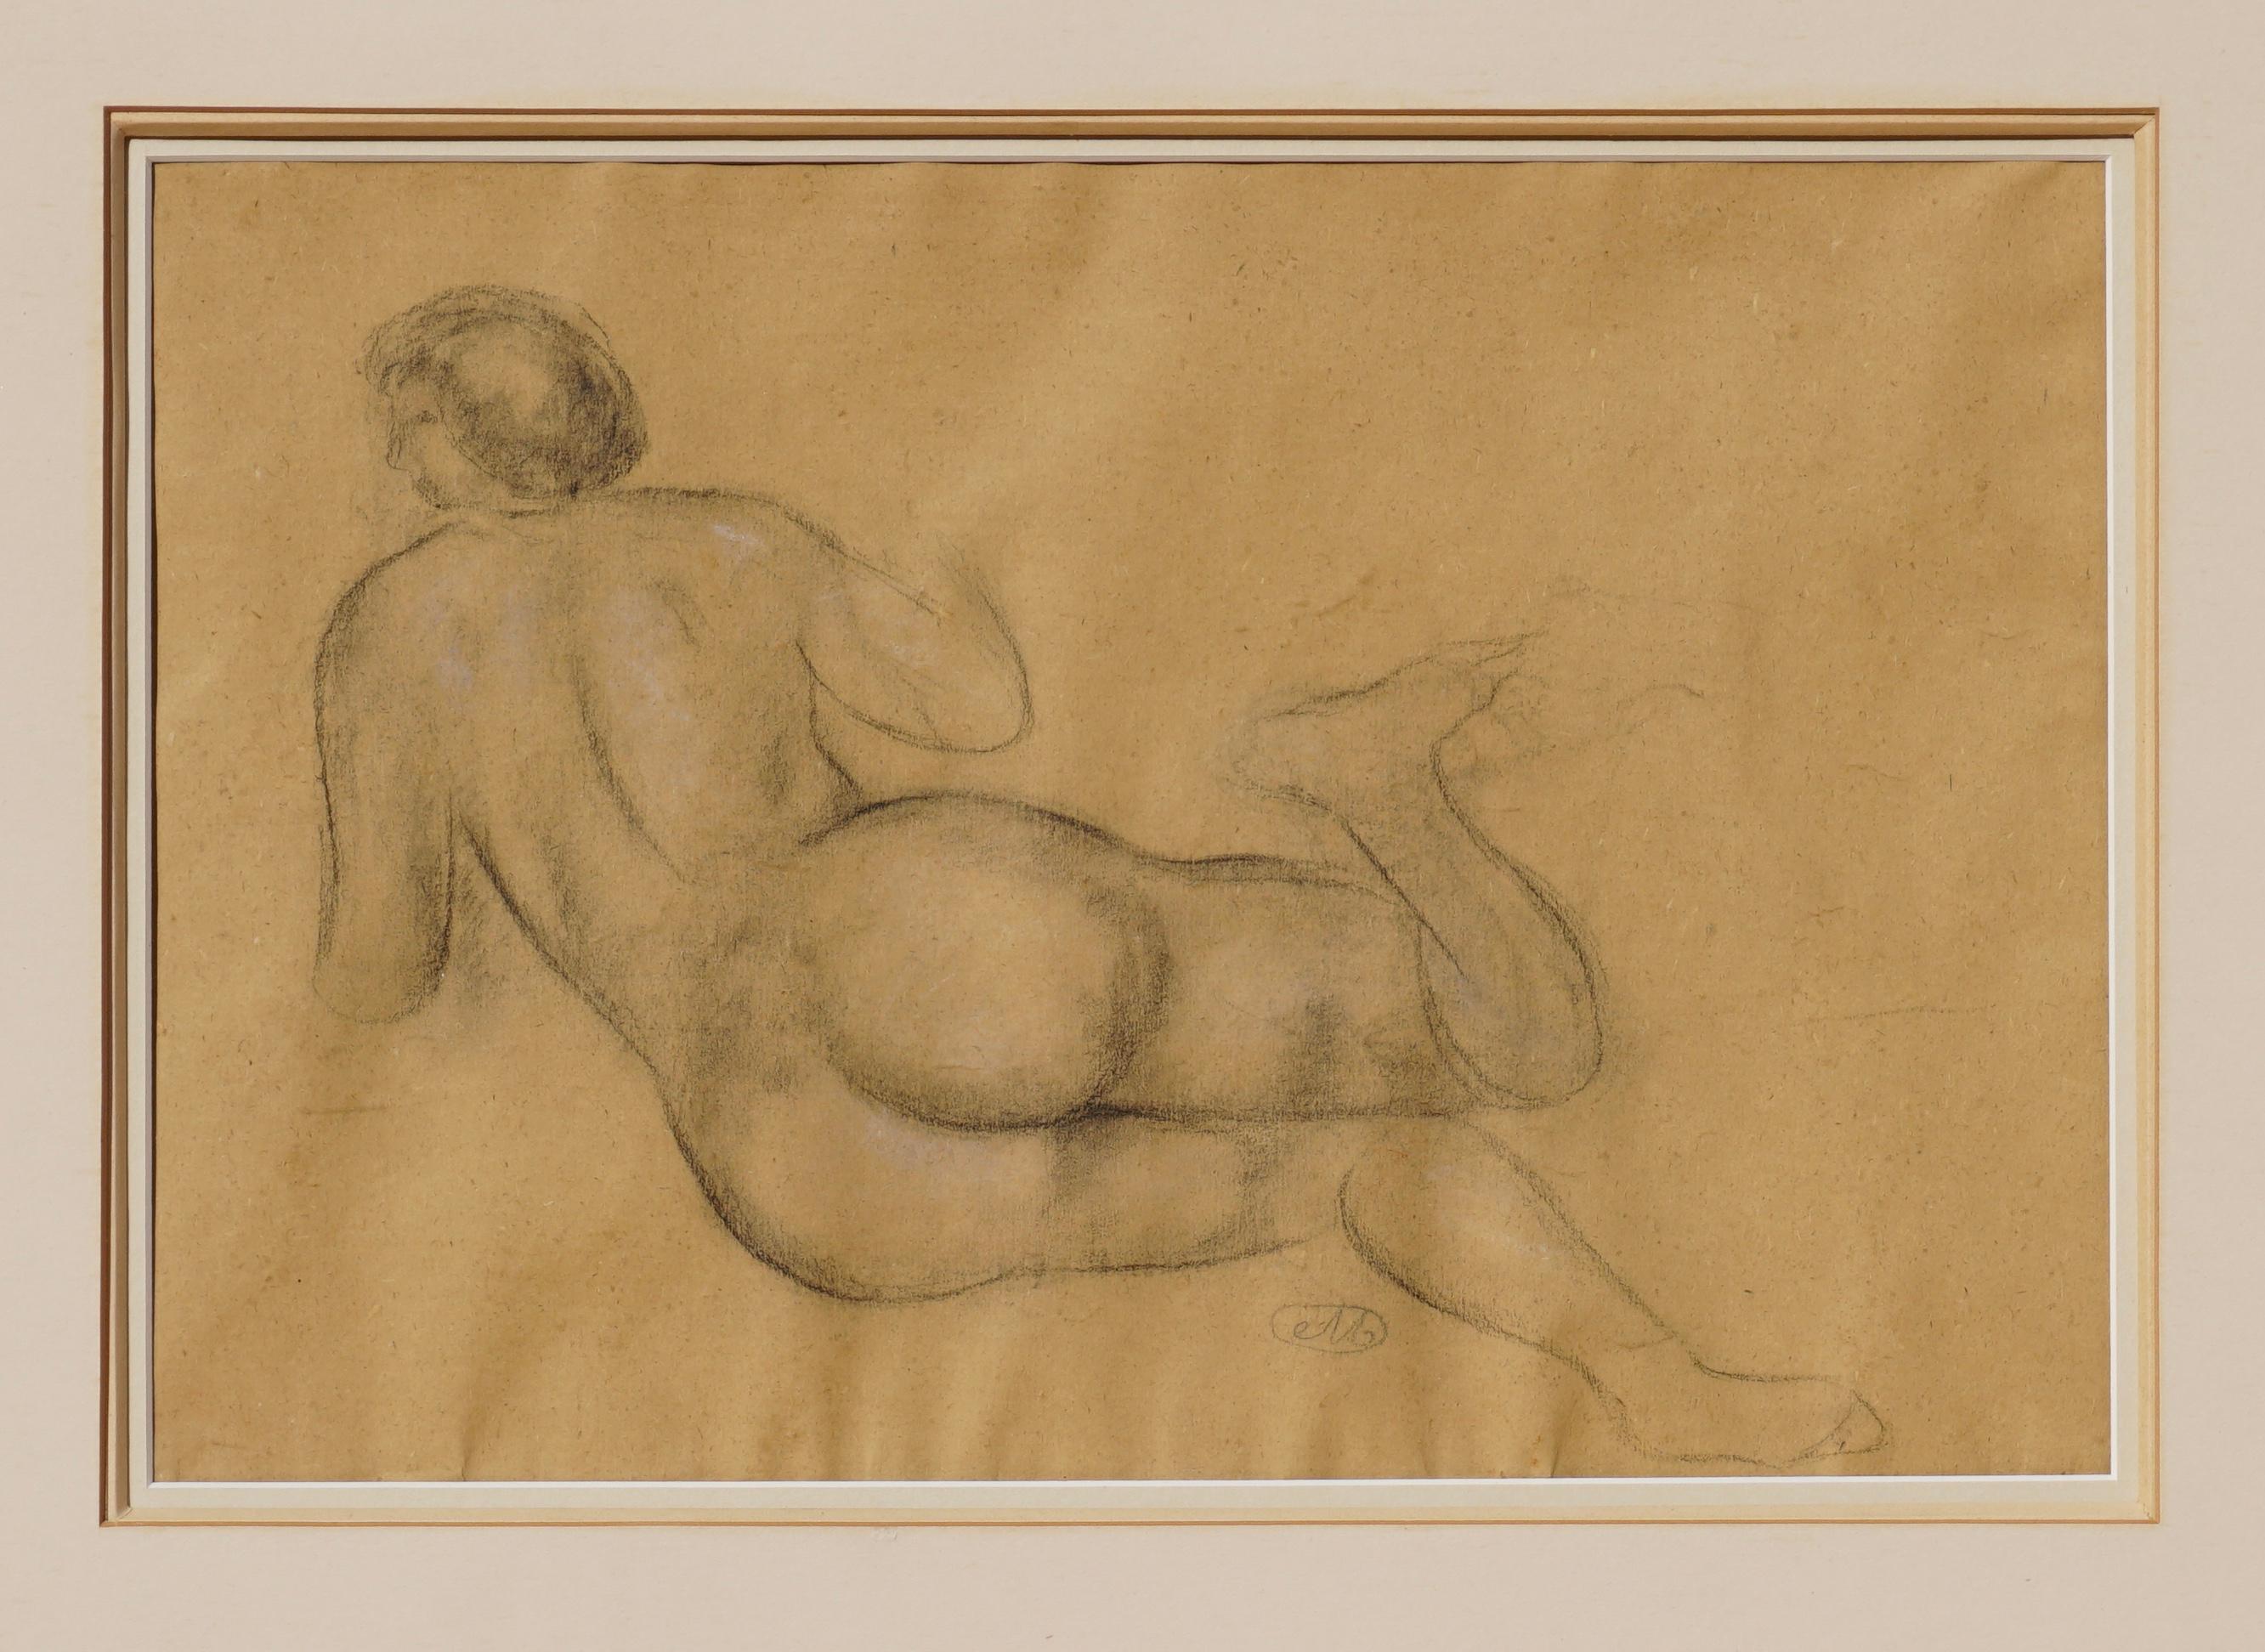 Hand-Painted Aristide Maillol Charcoal Drawing “Nu De Dos” 